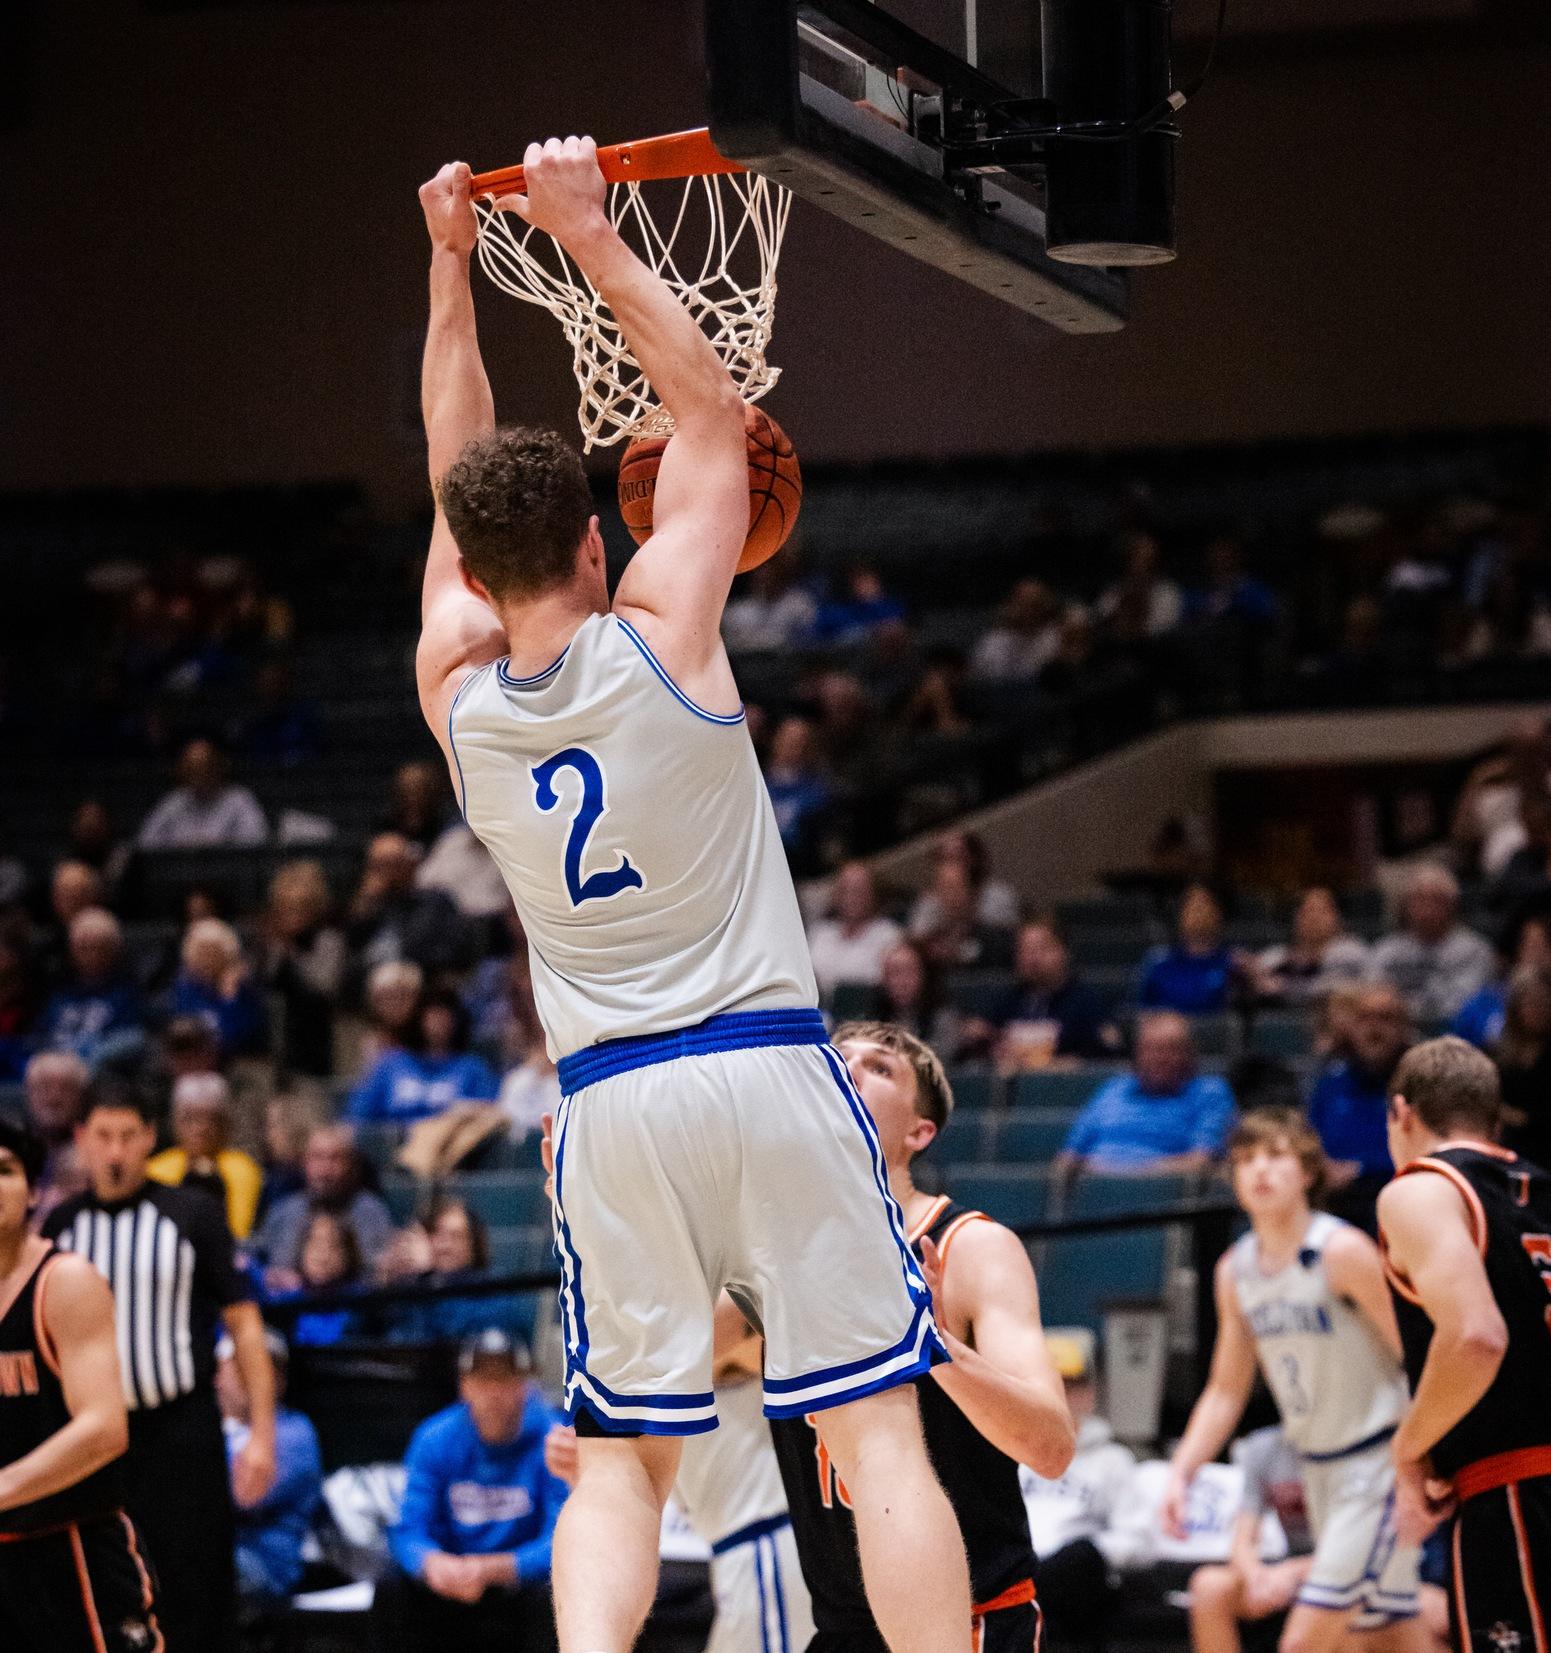 FOUR TIGERS SCORE DOUBLE DIGITS IN UPSET VICTORY OVER MORNINGSIDE